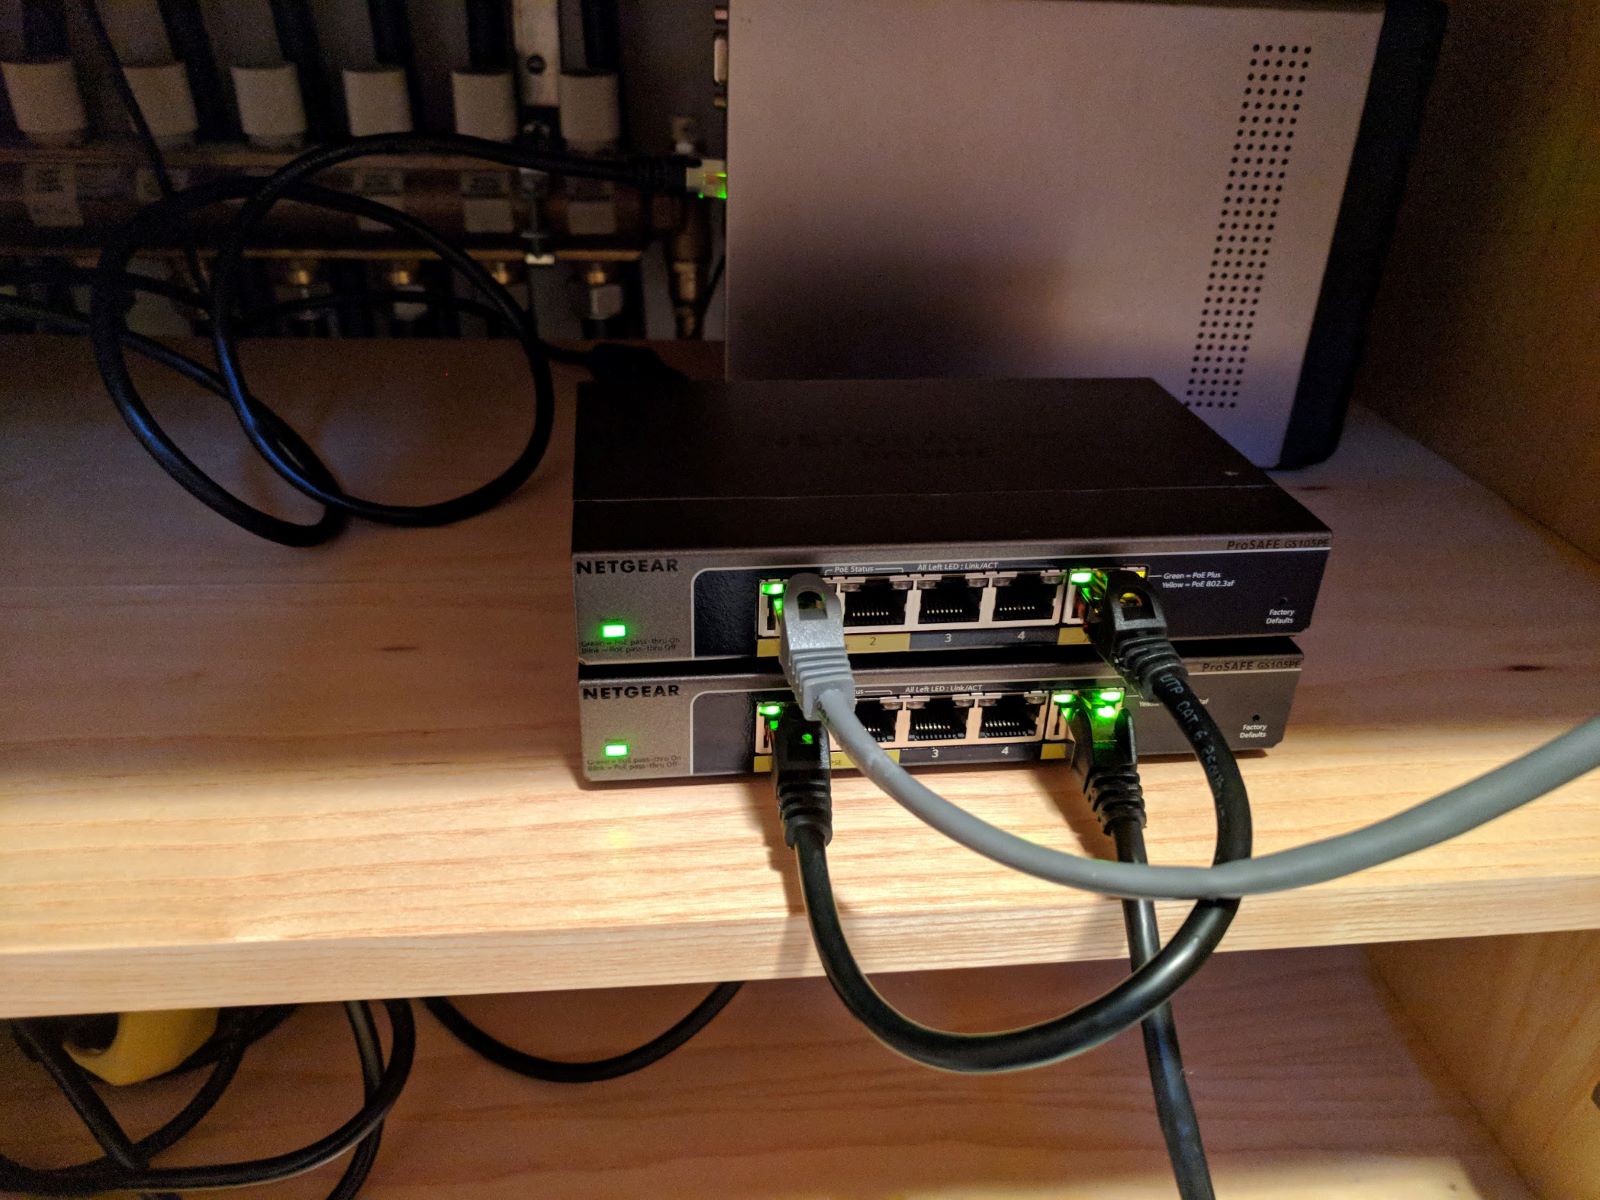 How To Daisy Chain Wireless Routers